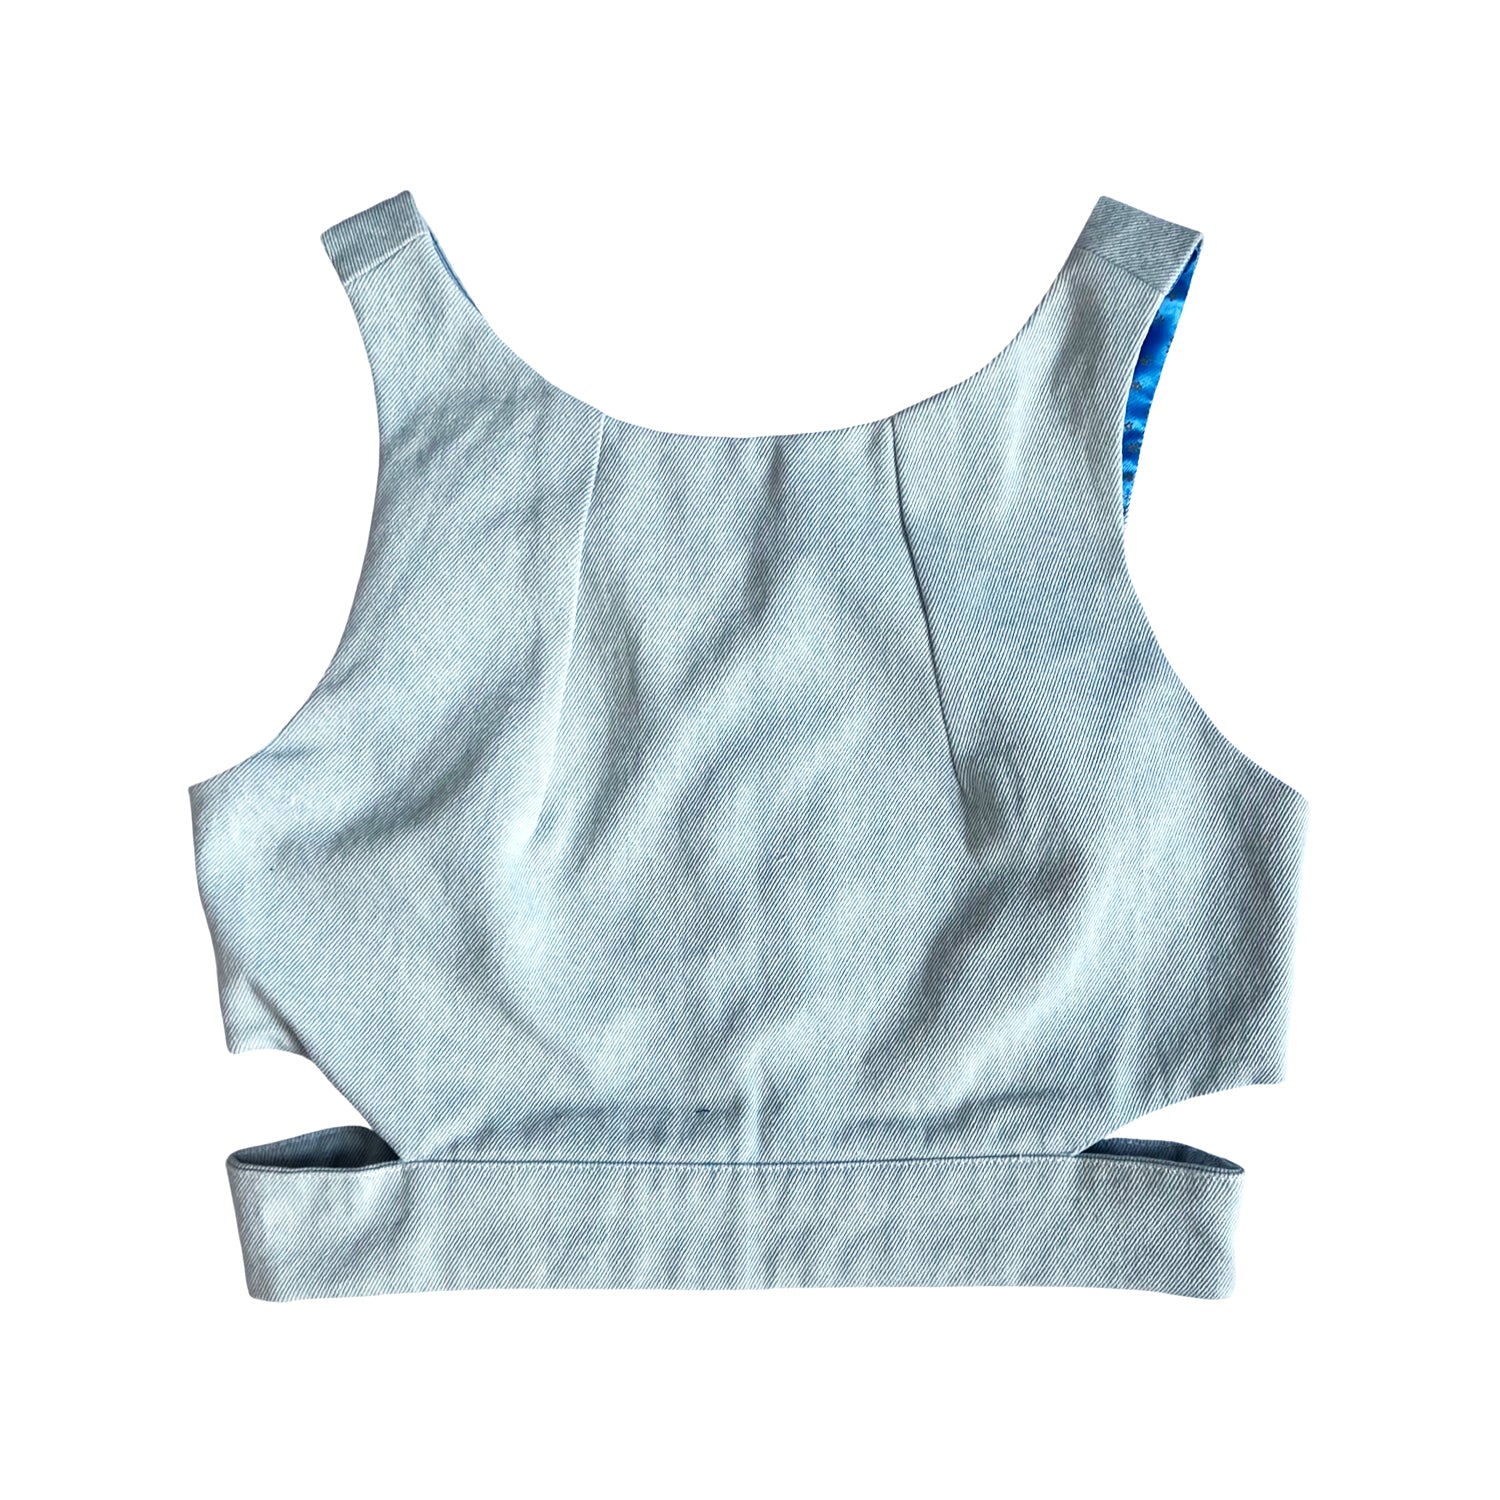 Denim Crop Top with Cut Outs in Washed Blue